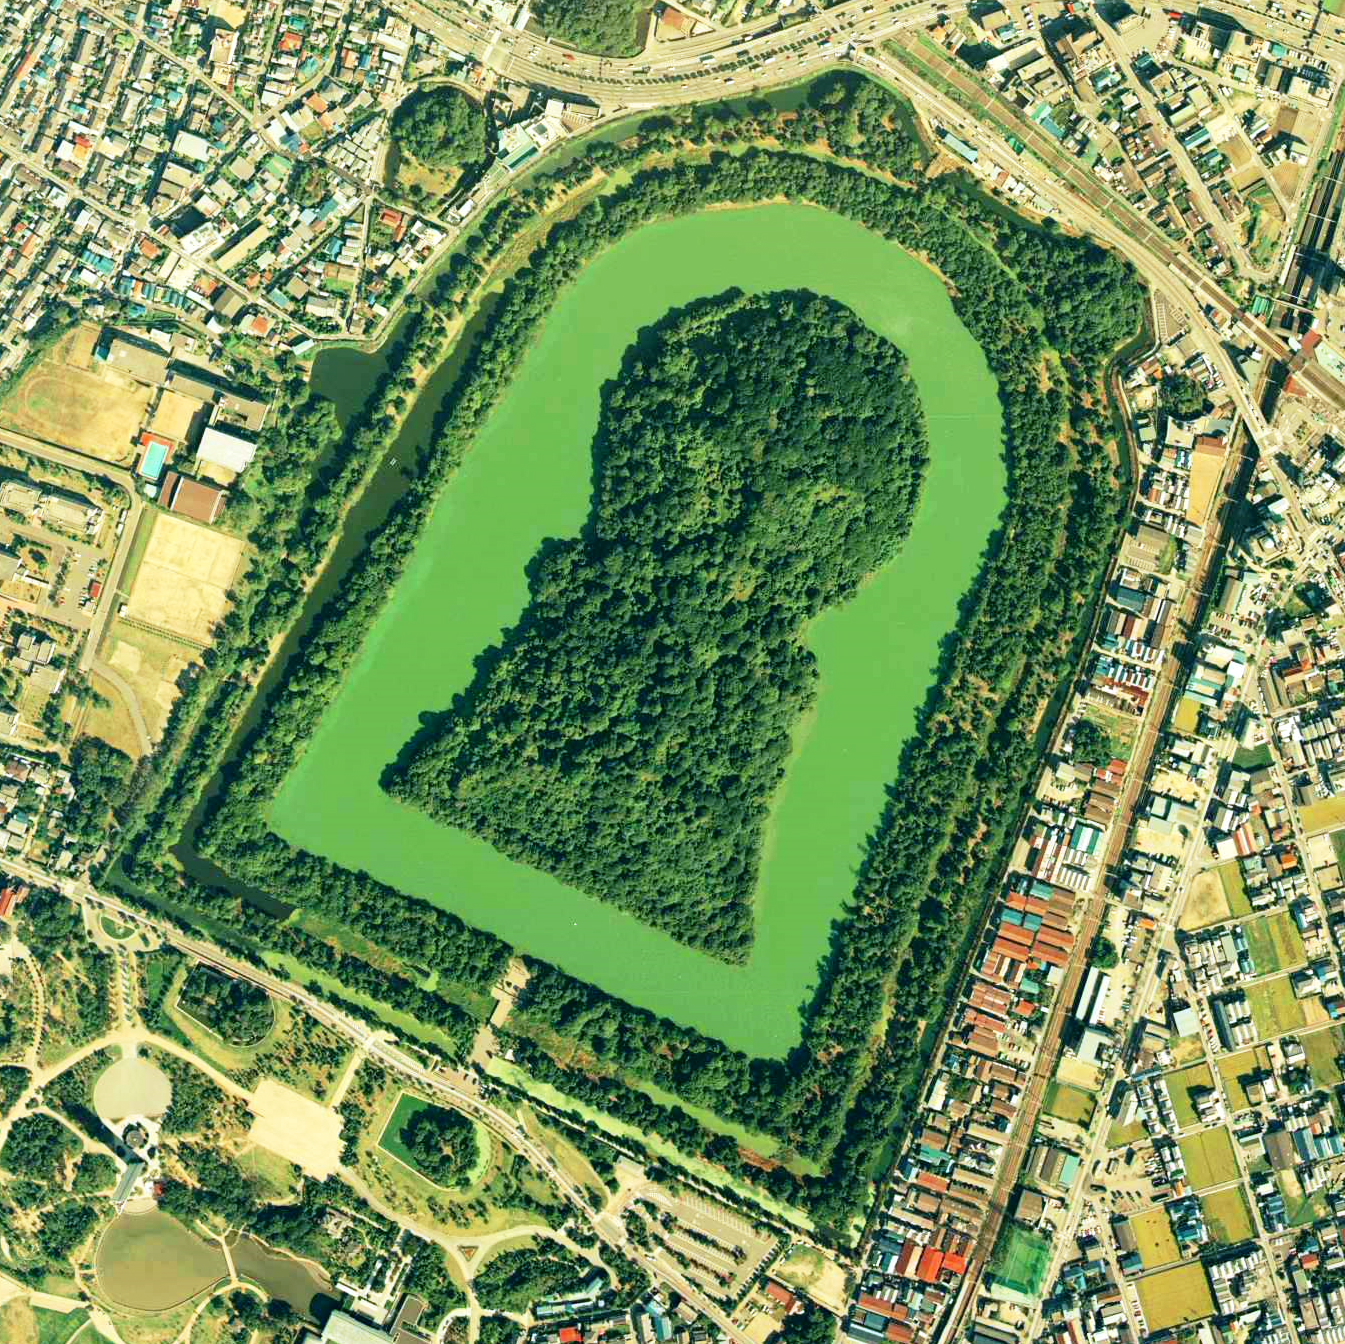 The Mozu Tombs in Japan stand out for their spectacular size and shapes. Photo: By Copyright © National Land Image Information (Color Aerial Photographs), Ministry of Land, Infrastructure, Transport and Tourism.